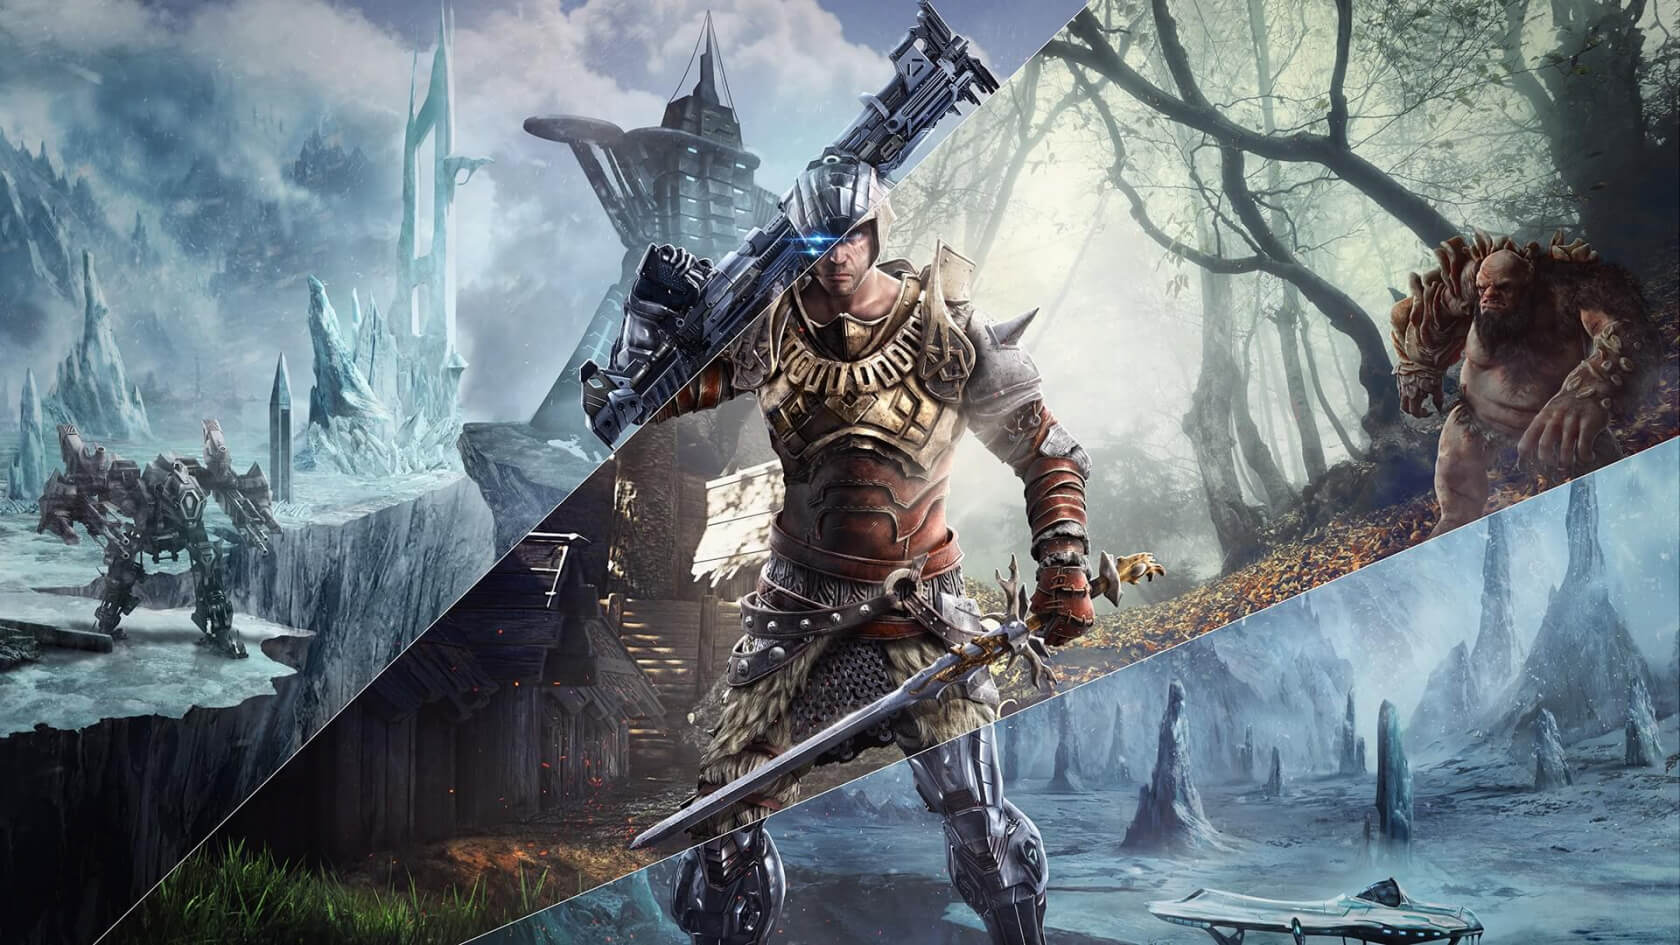 ELEX is a SciFi/Fantasy sandbox RPG from the makers of Gothic